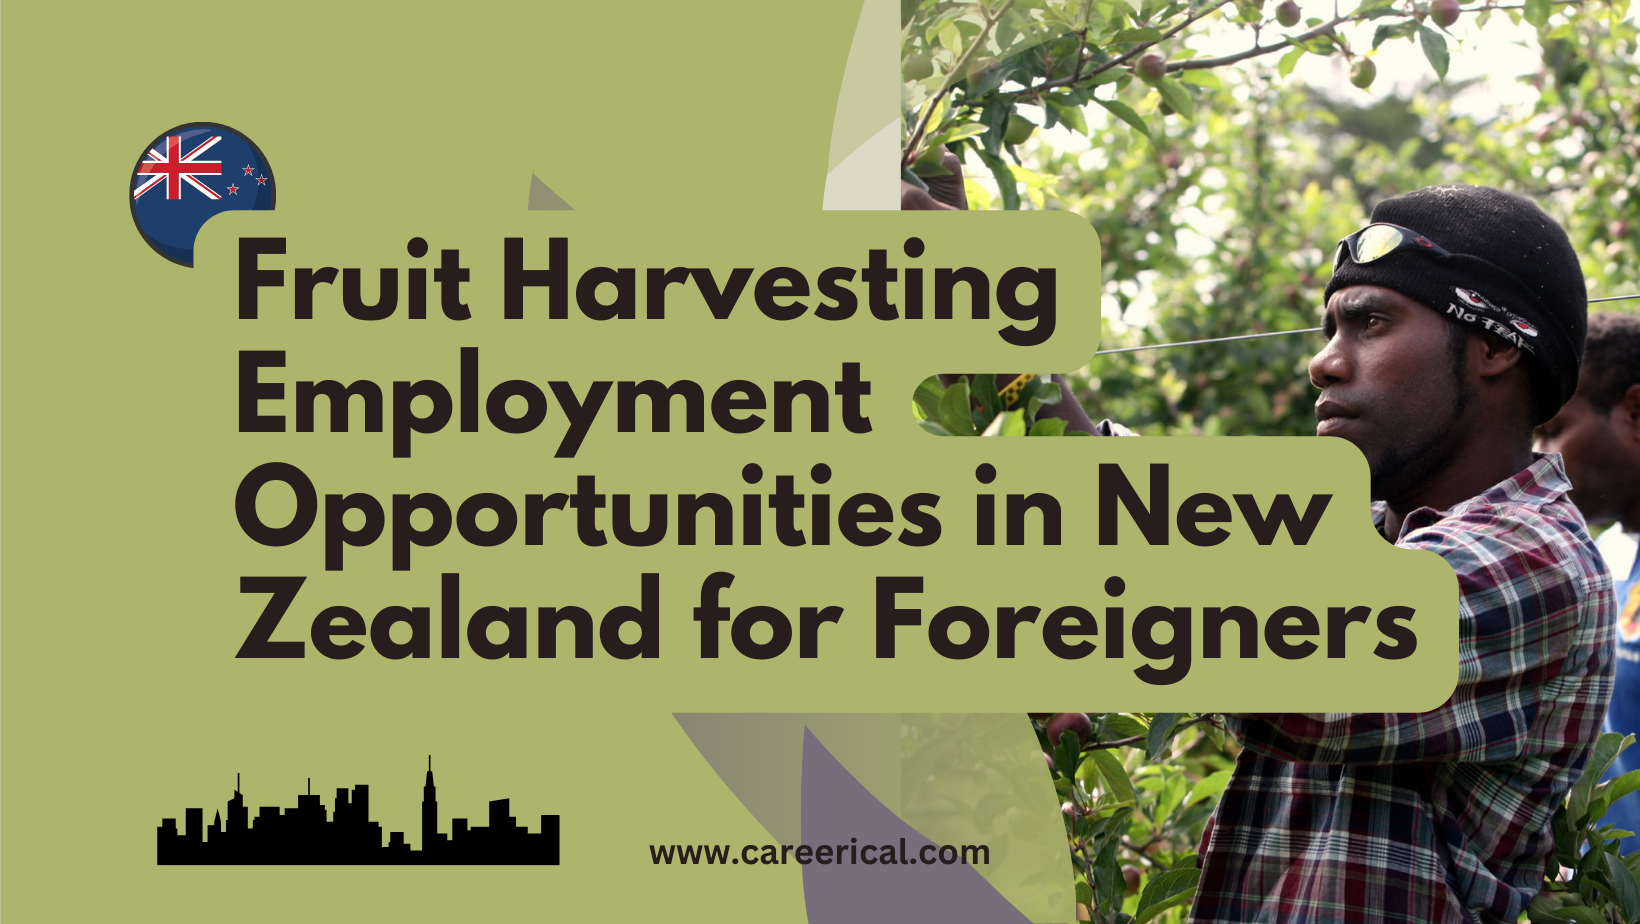 Fruit Harvesting Employment Opportunities in New Zealand for Foreigners